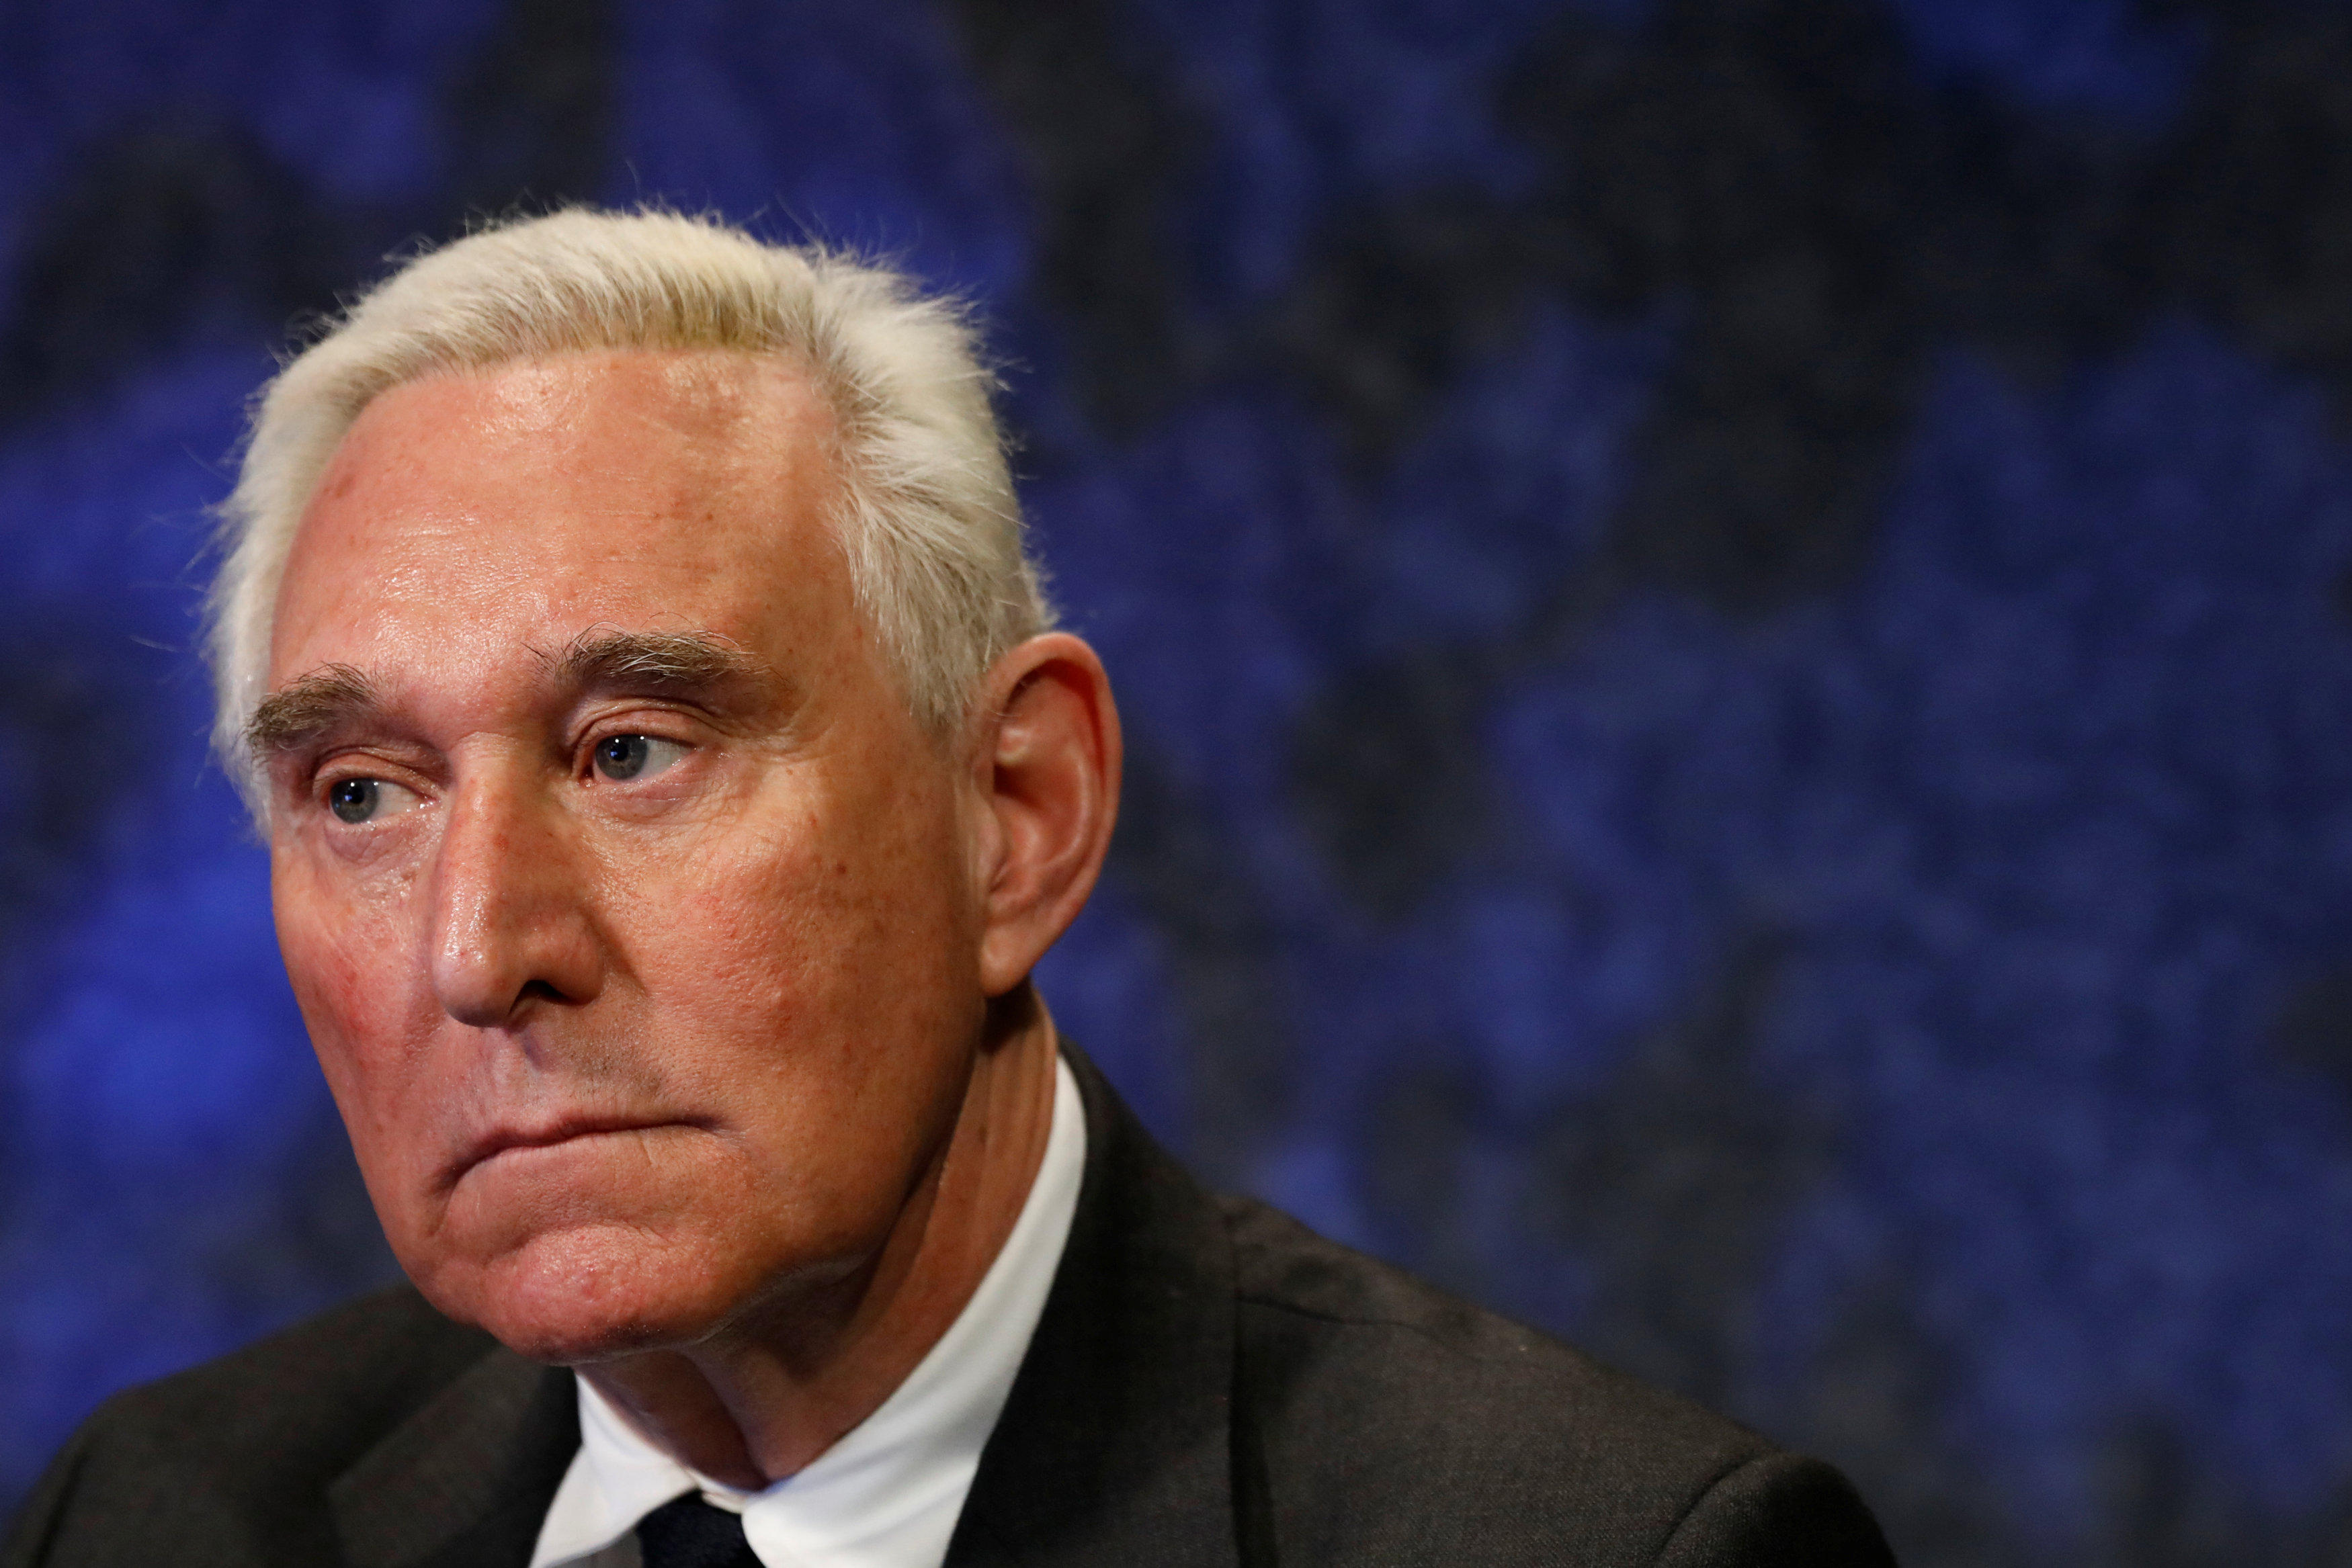 Roger Stone, Carter Page offer to speak to House Intelligence Committee - CBS News